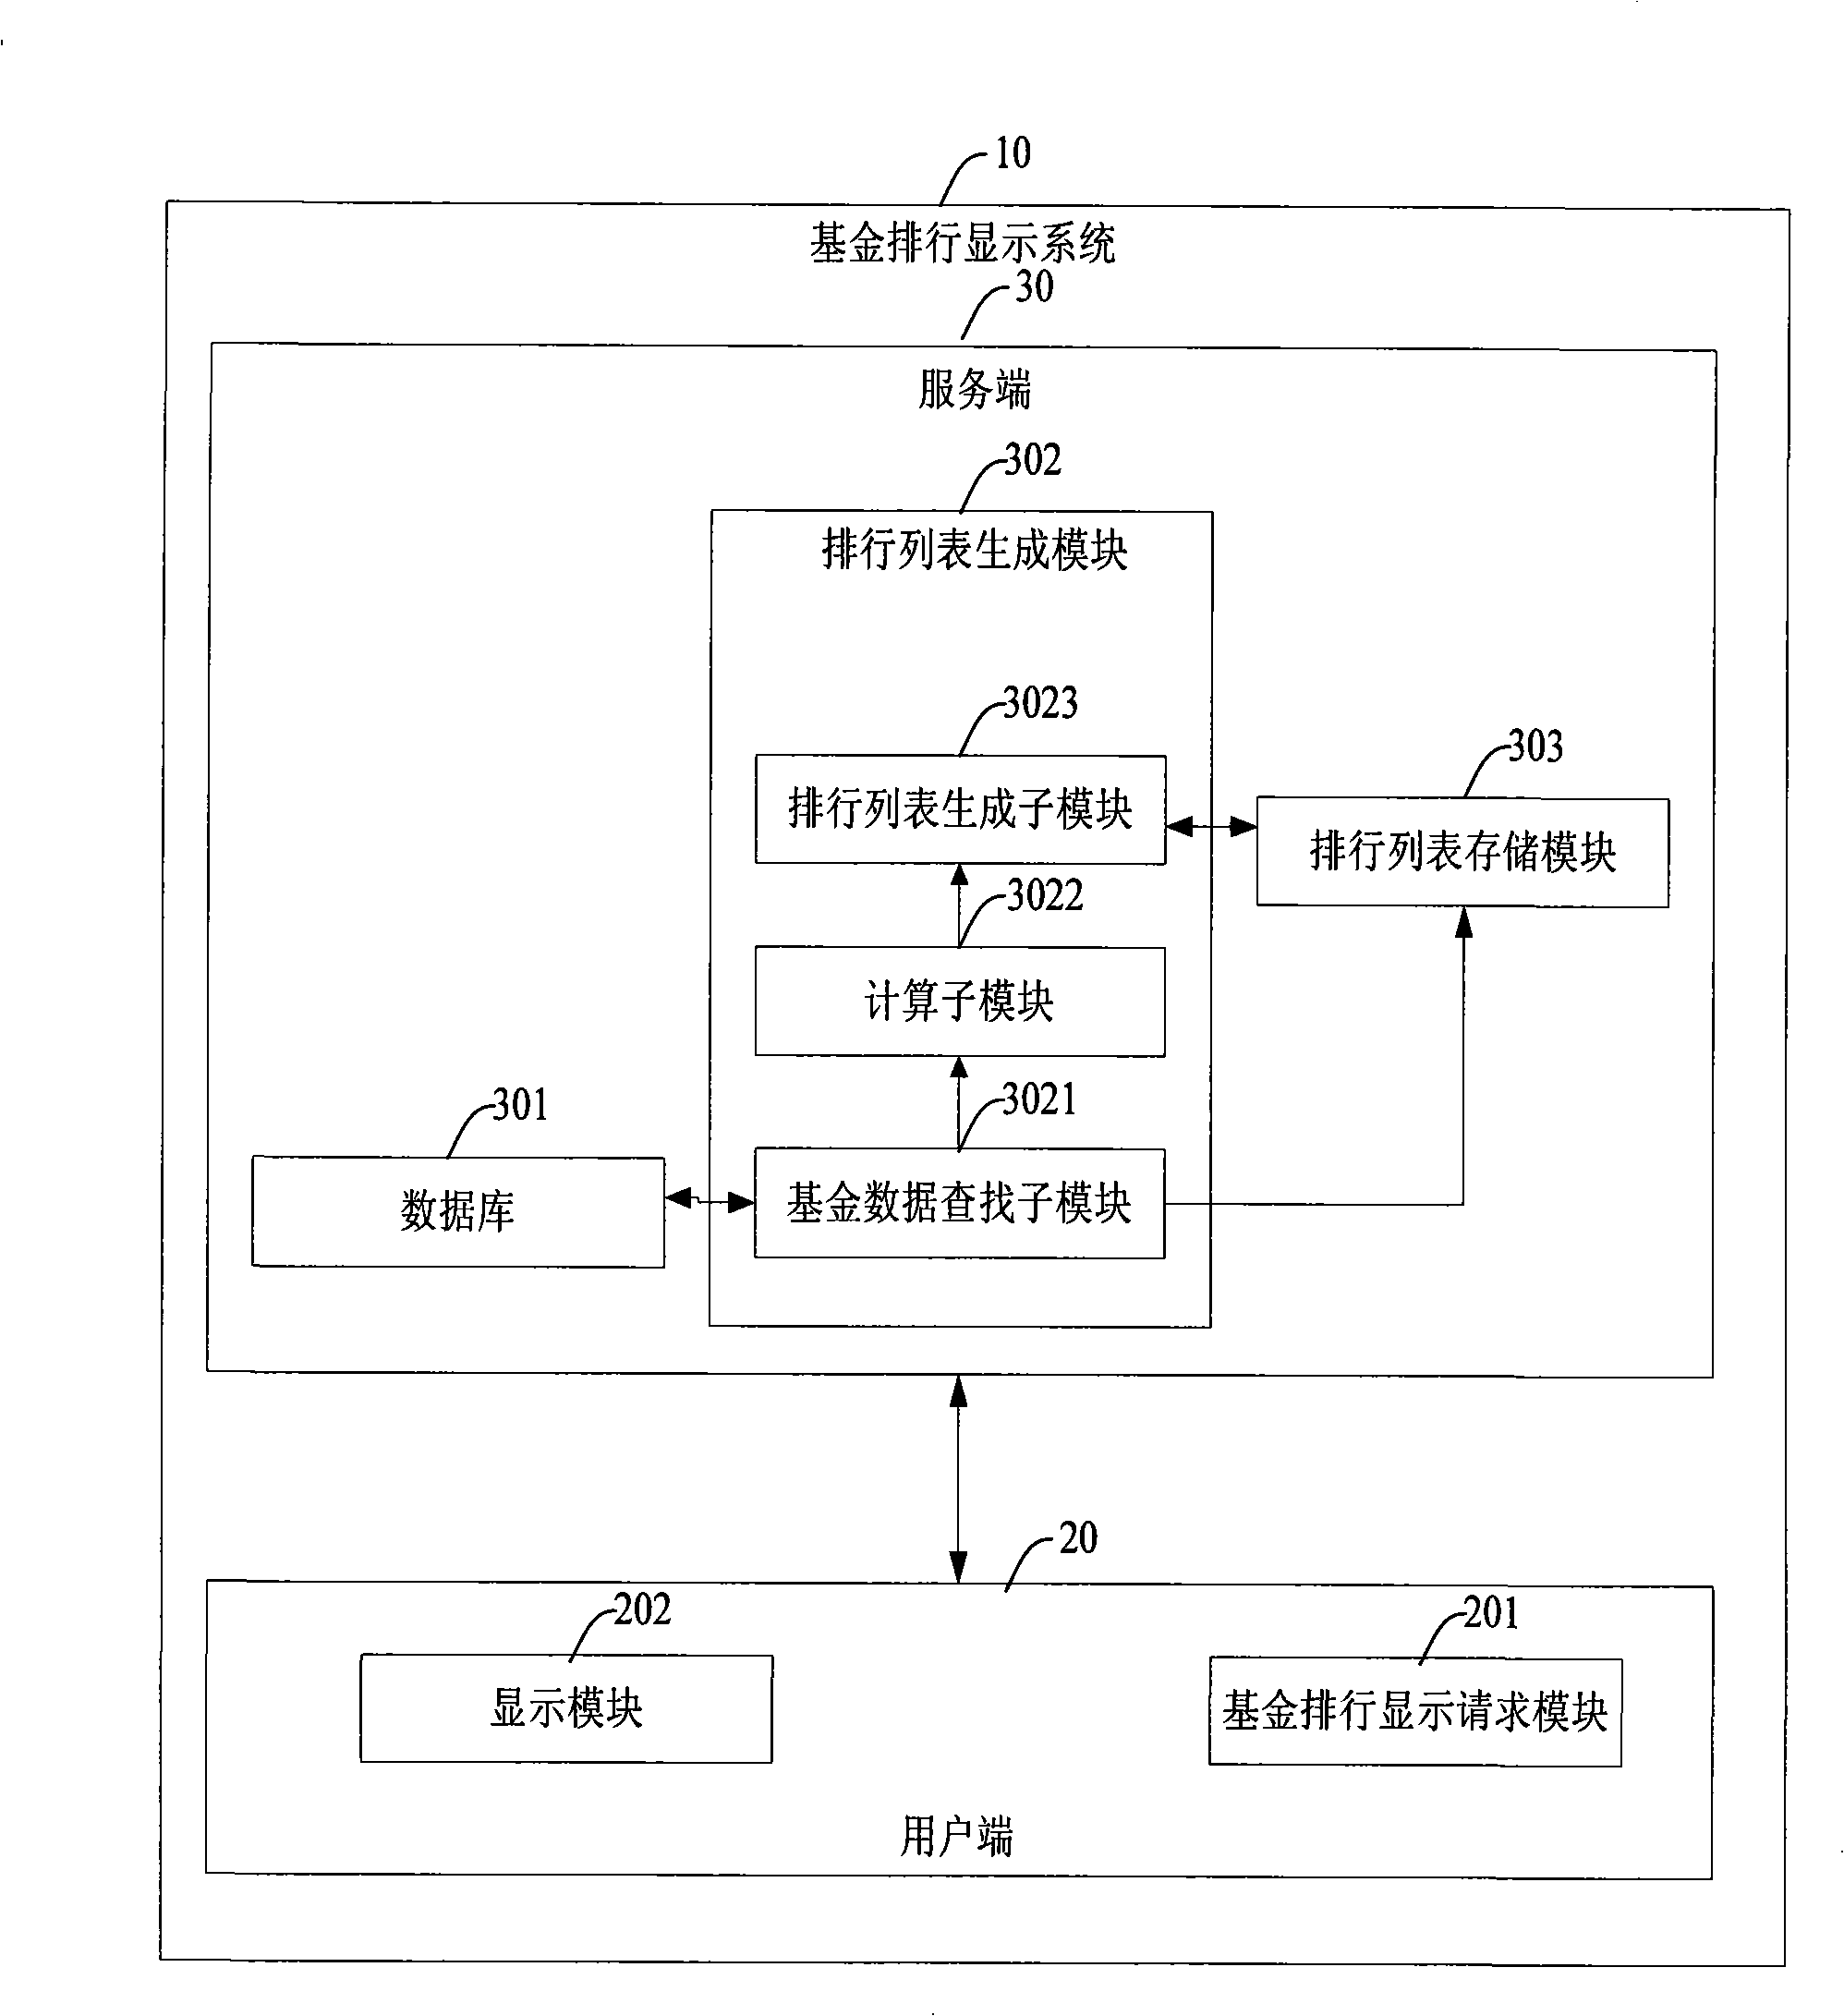 Fund ranking display system and fund ranking display process